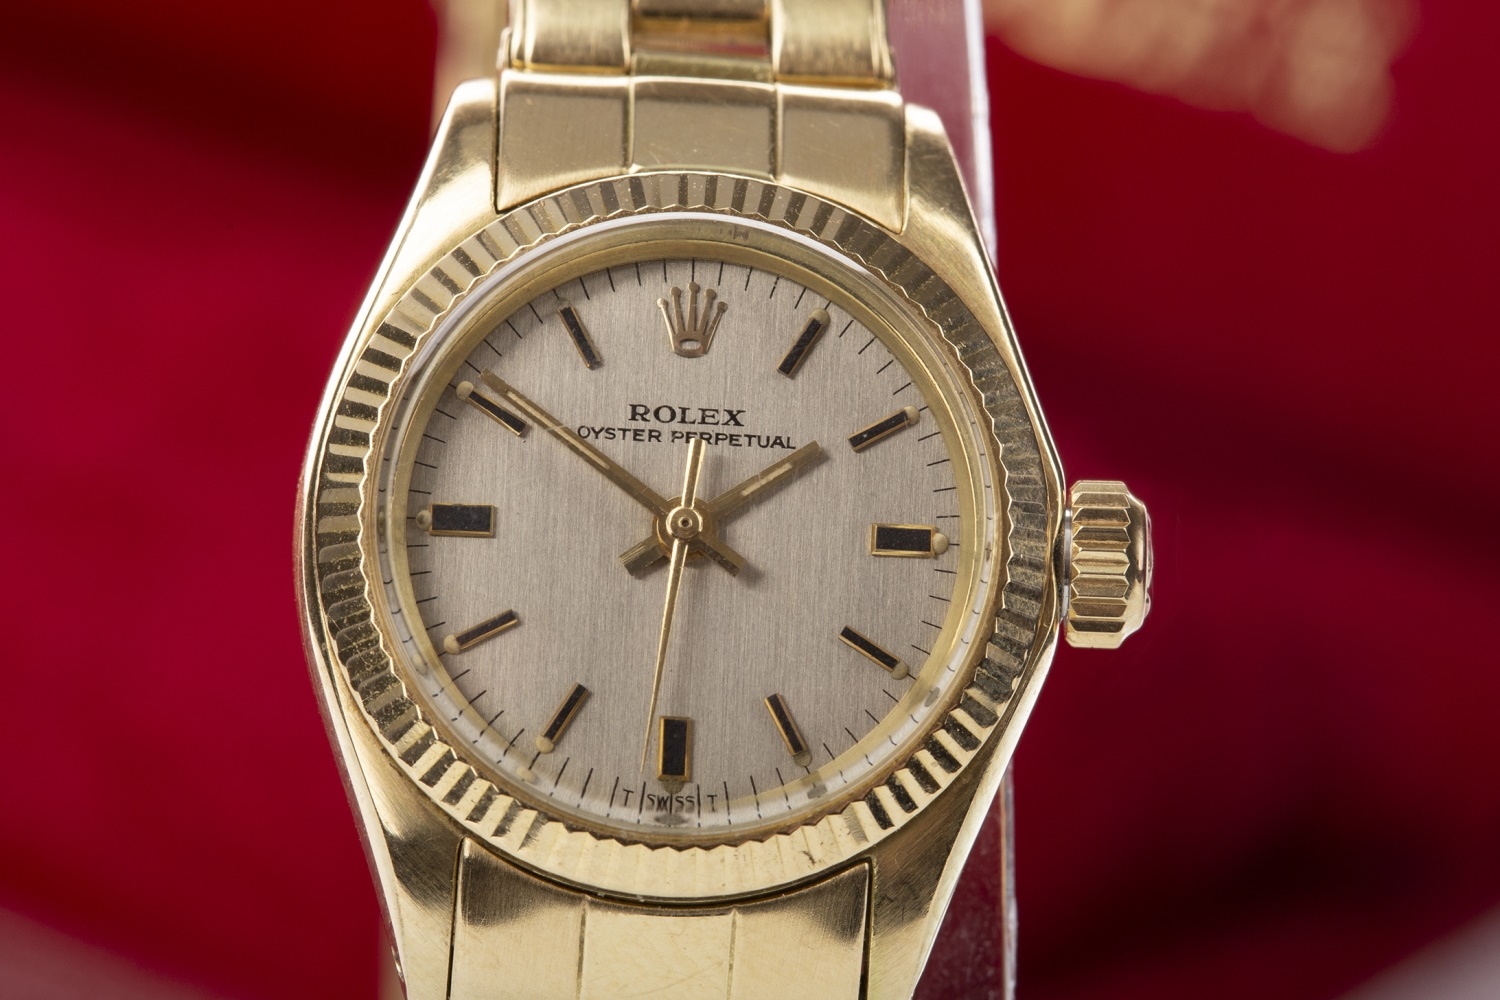 LADYS ROLEX GOLD WATCH - Image 2 of 7